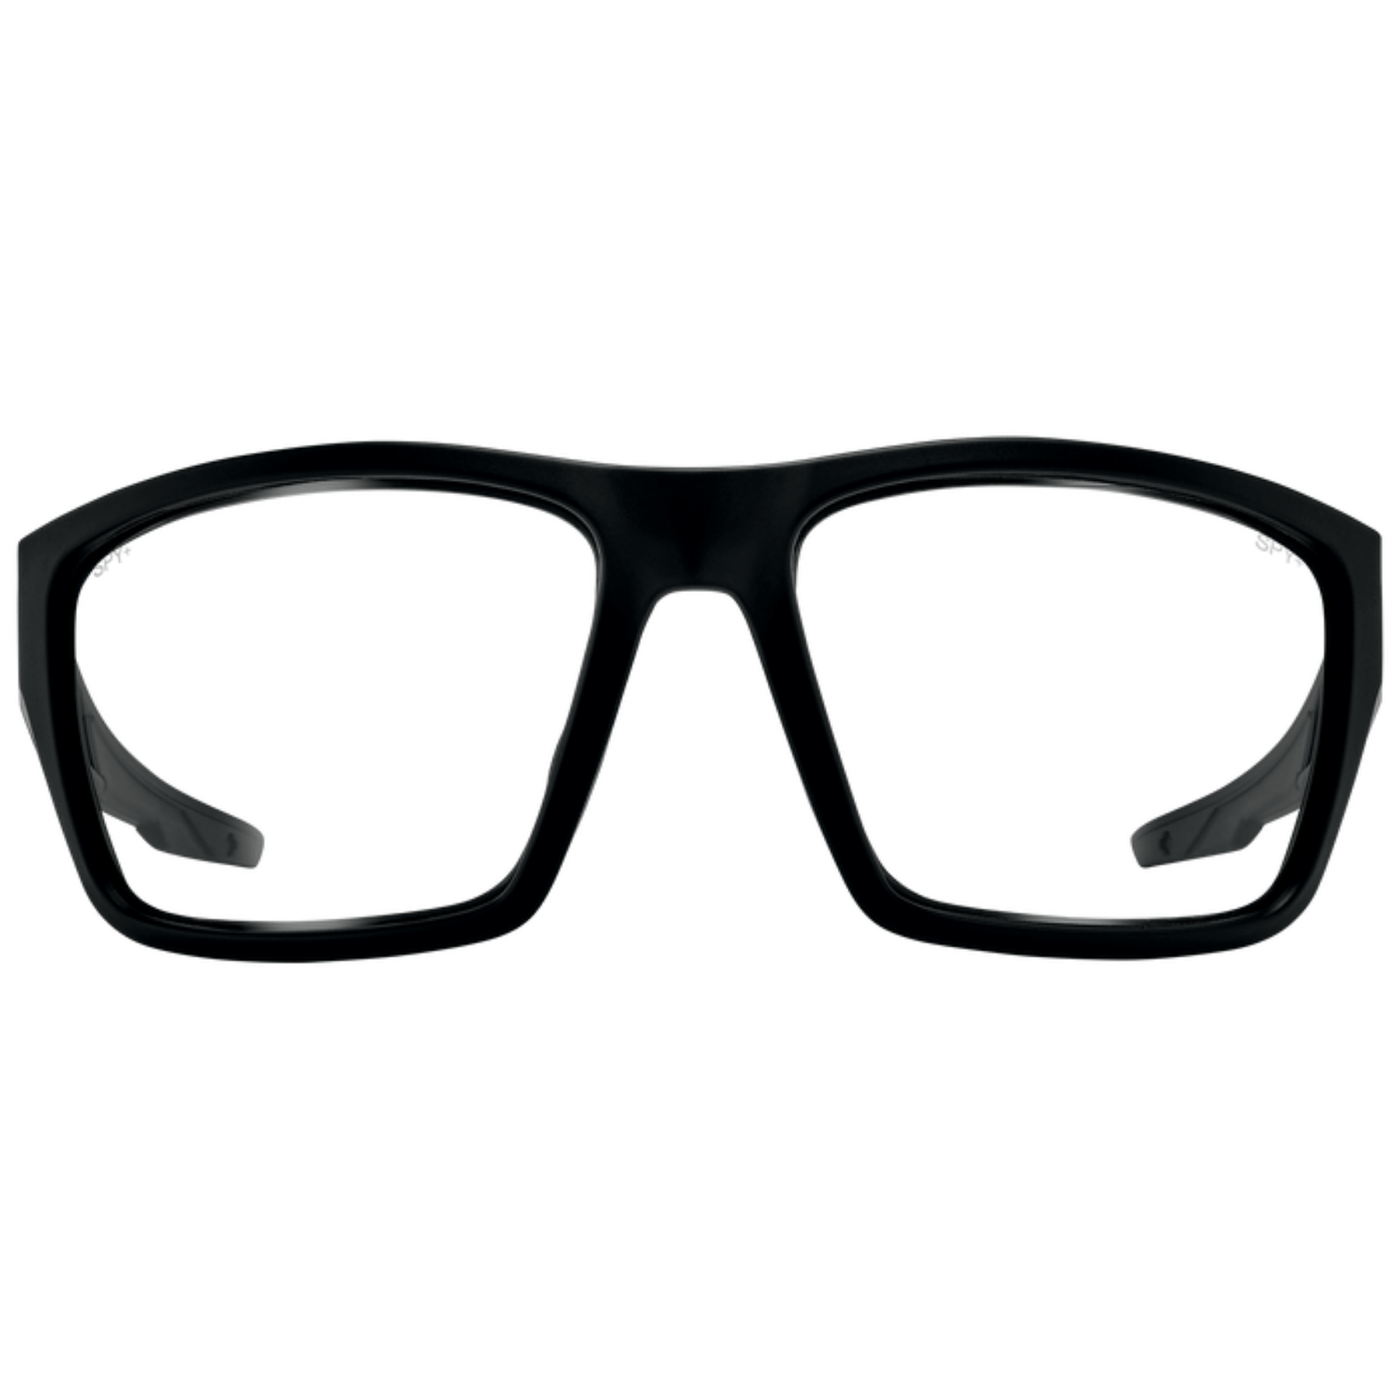 SPY DIRTY MO TECH Clear ANSI Approved Safety Glasses 8Lines Shop - Fast Shipping